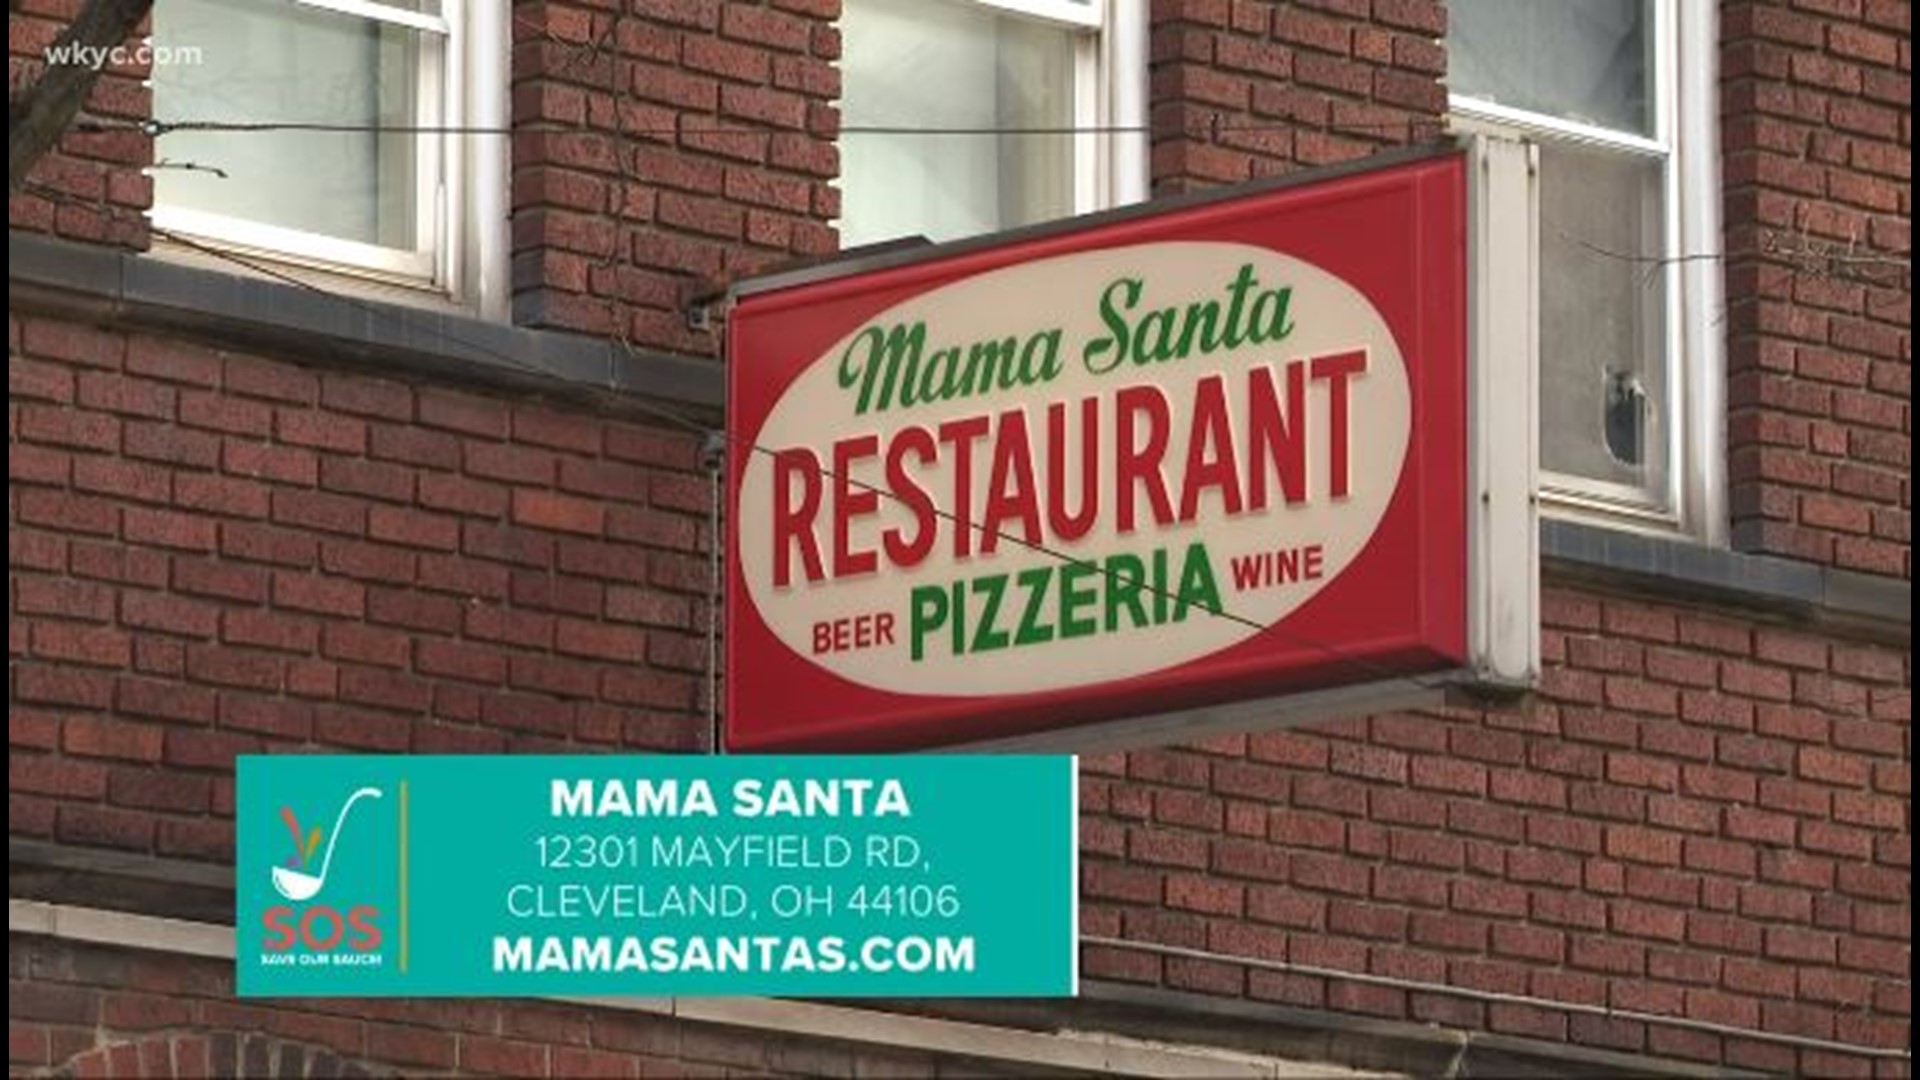 Today we're shining the spotlight on Mama Santa's in Little Italy for the 'Save our Sauce' campaign to support Northeast Ohio restaurants amid the COVID-19 pandemic.